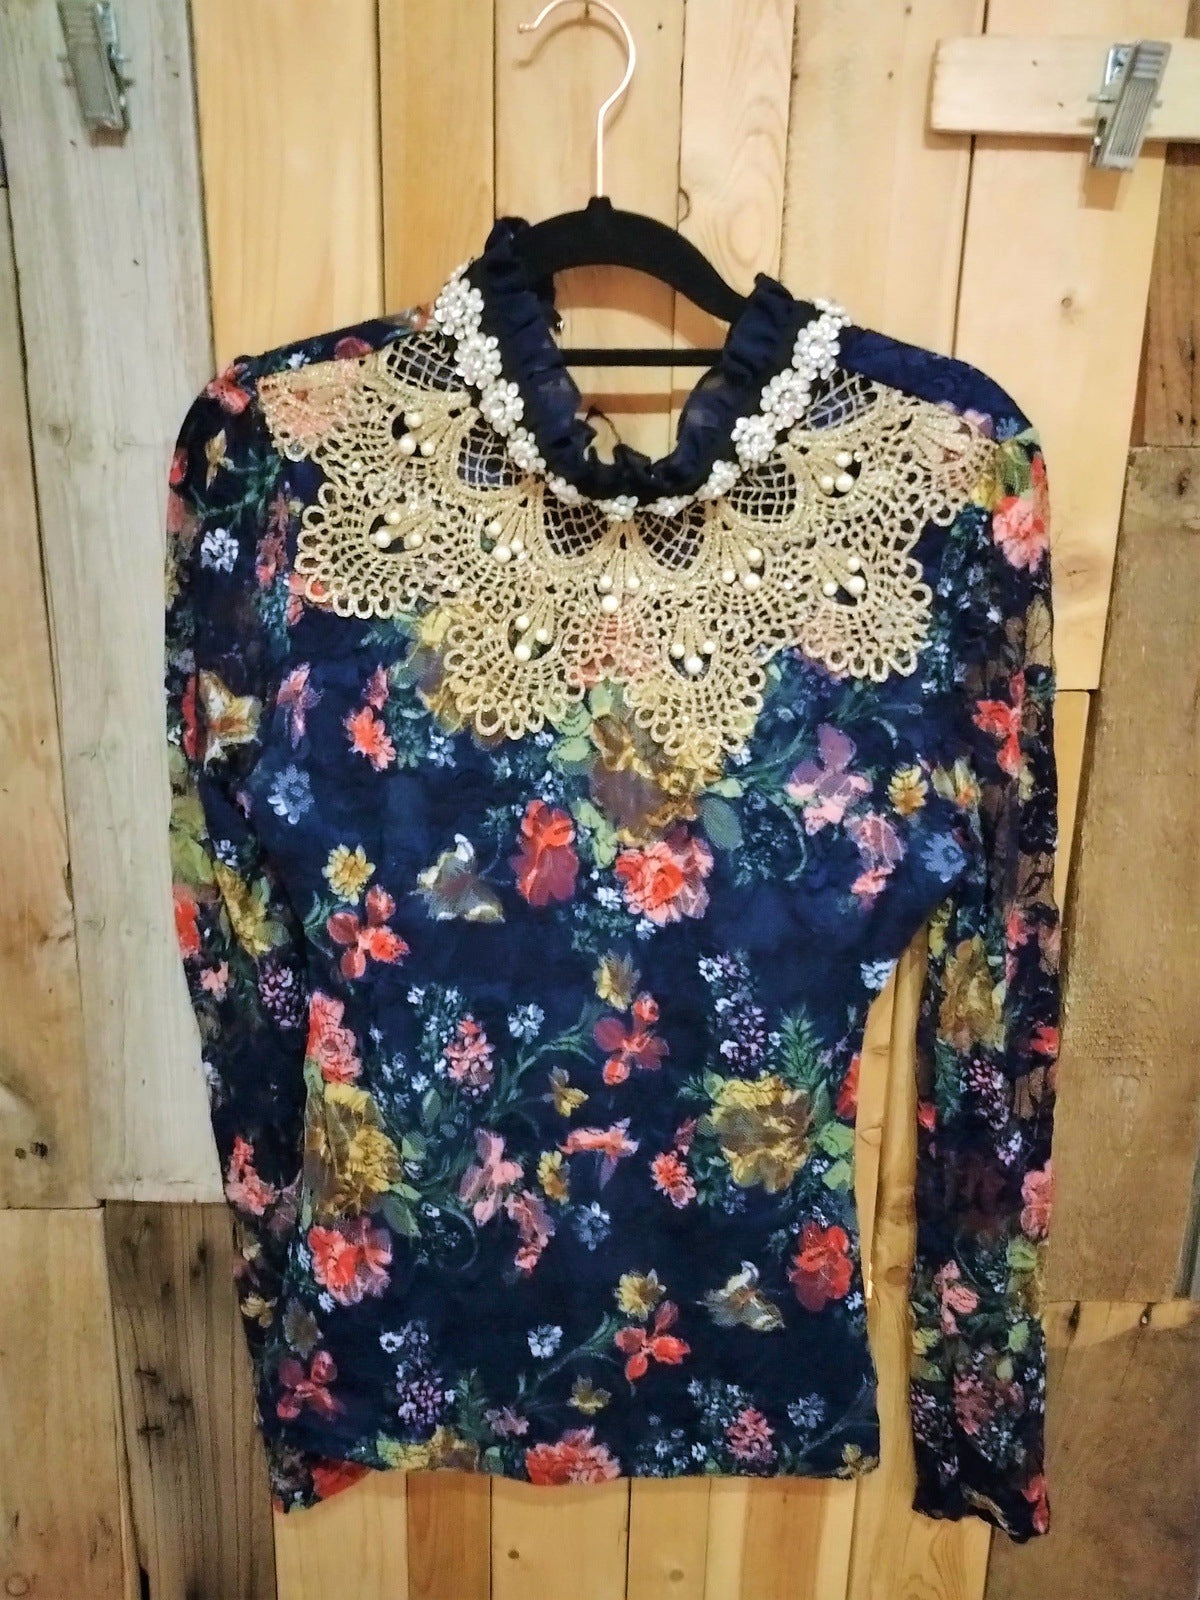 Boutique Women's Top Lace and Embellishments Size S/M